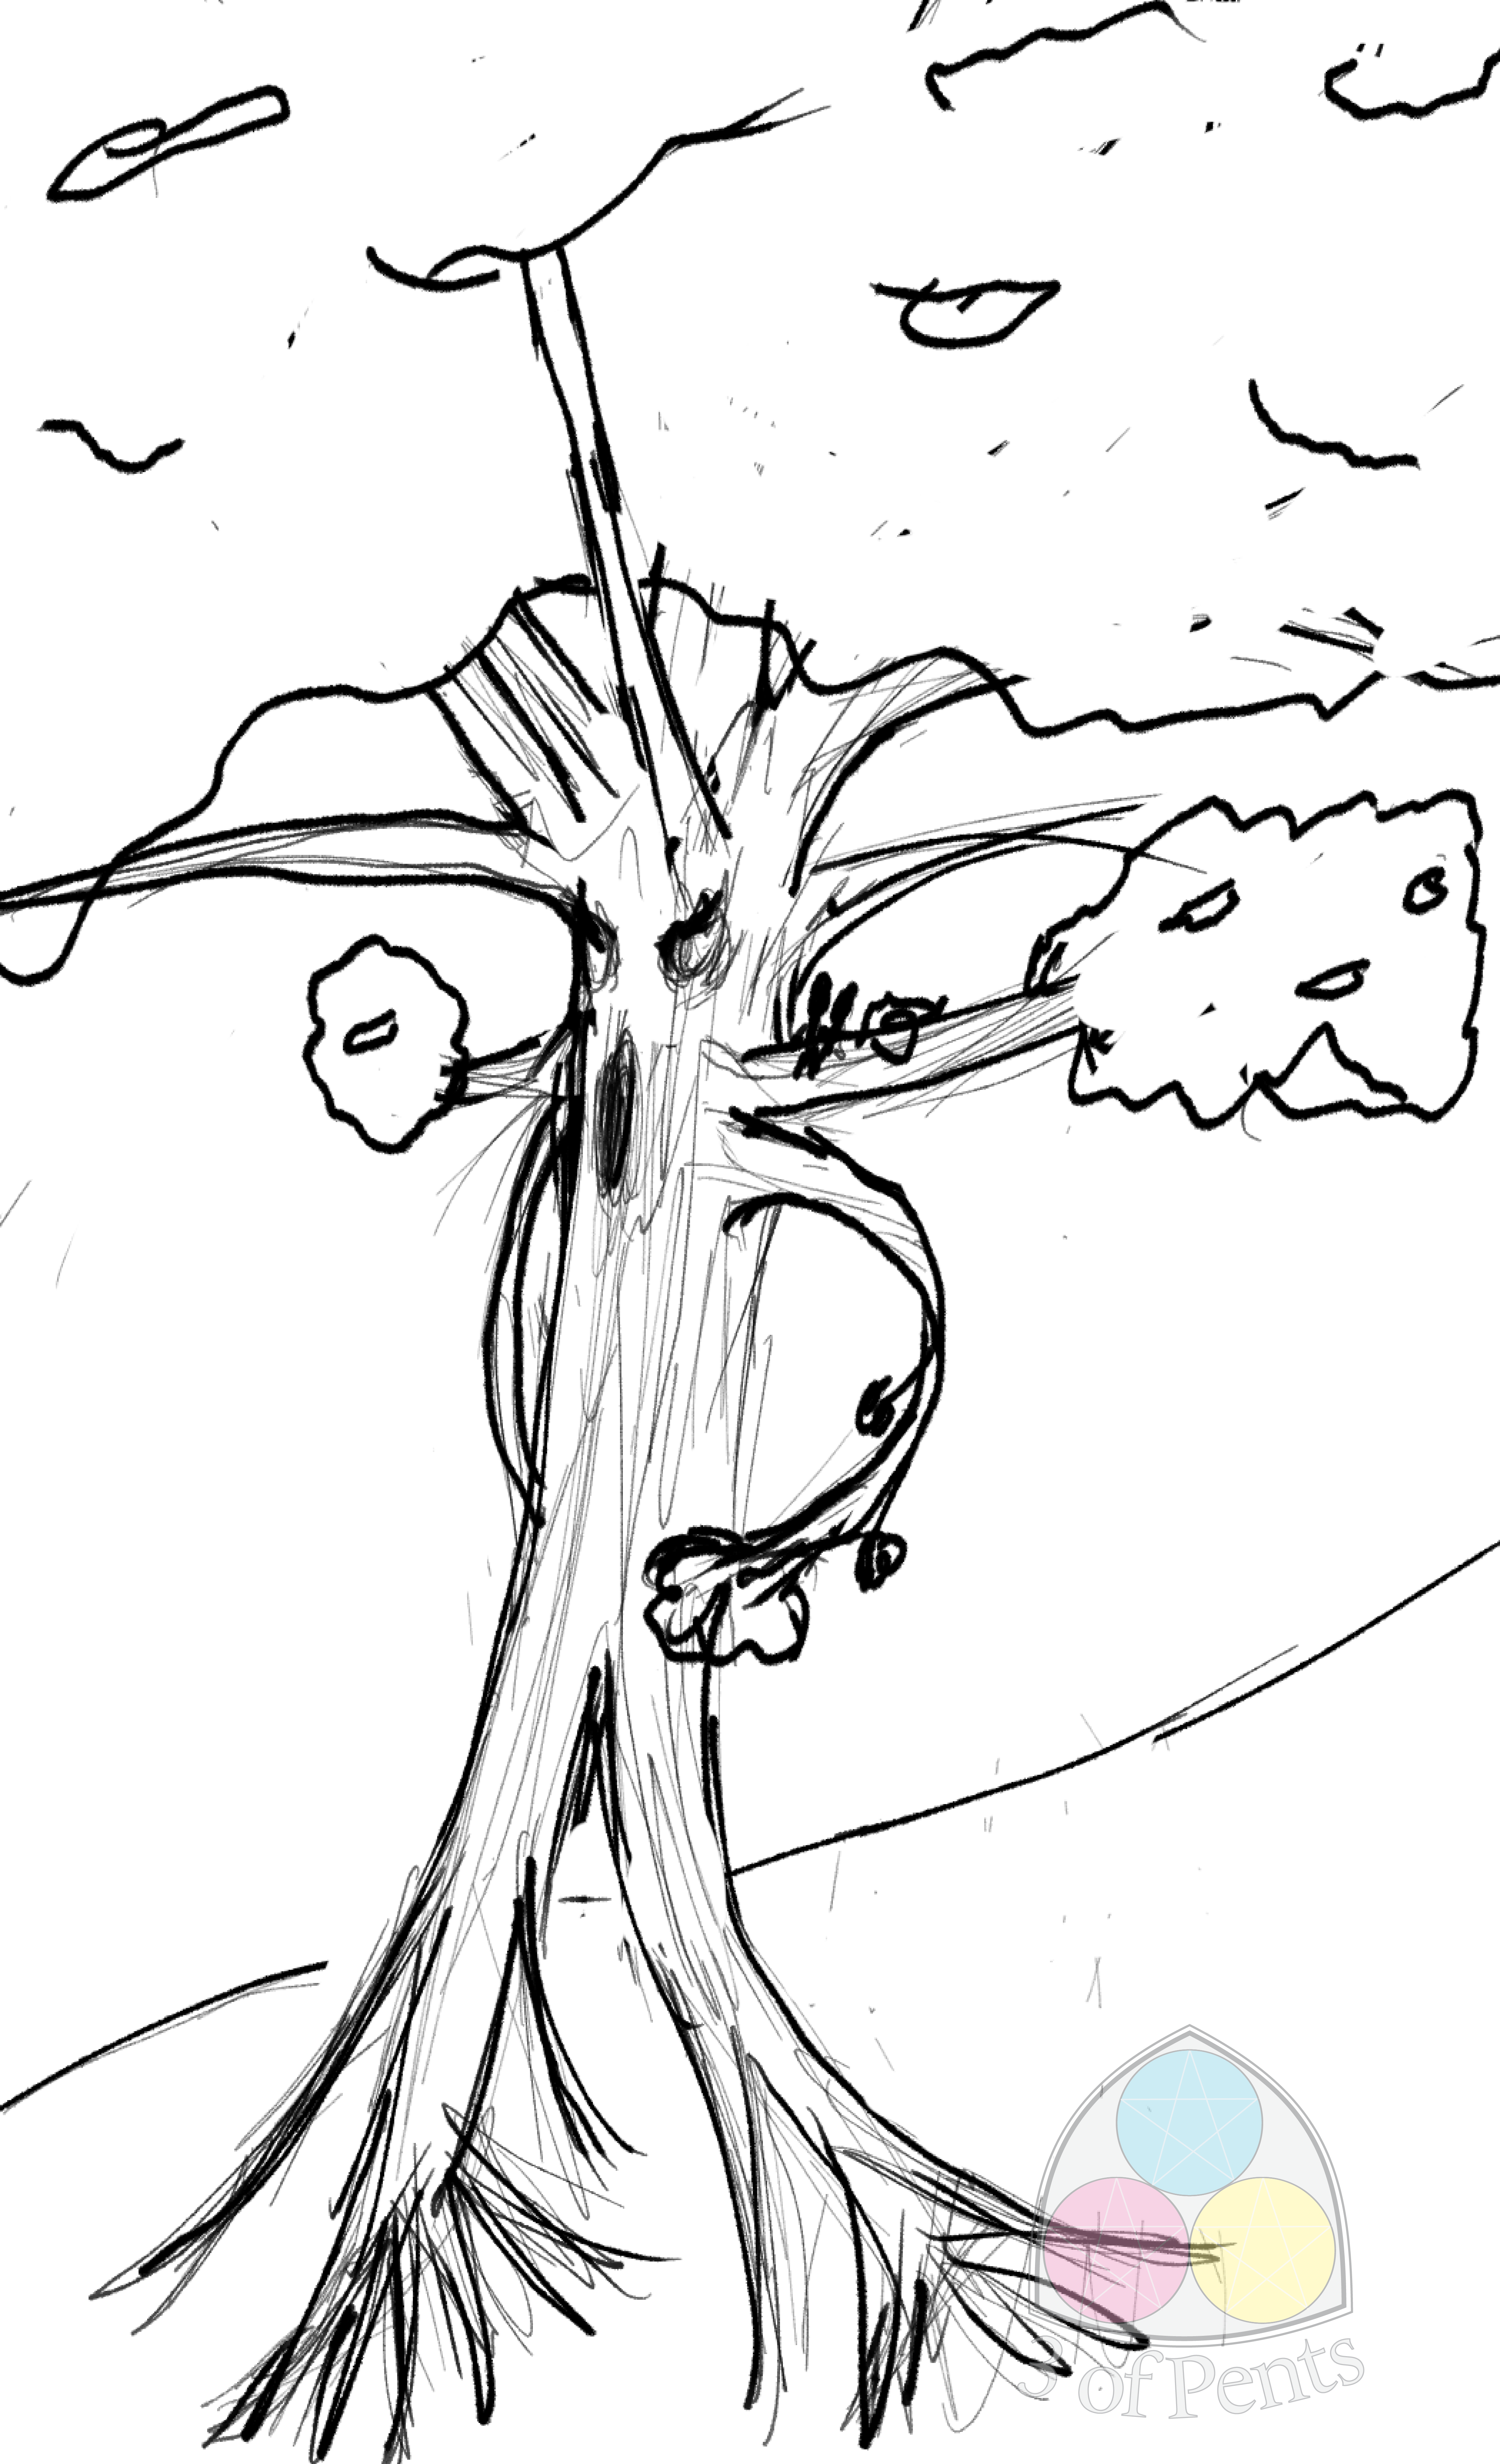 Daily Sketch // A swearing tree